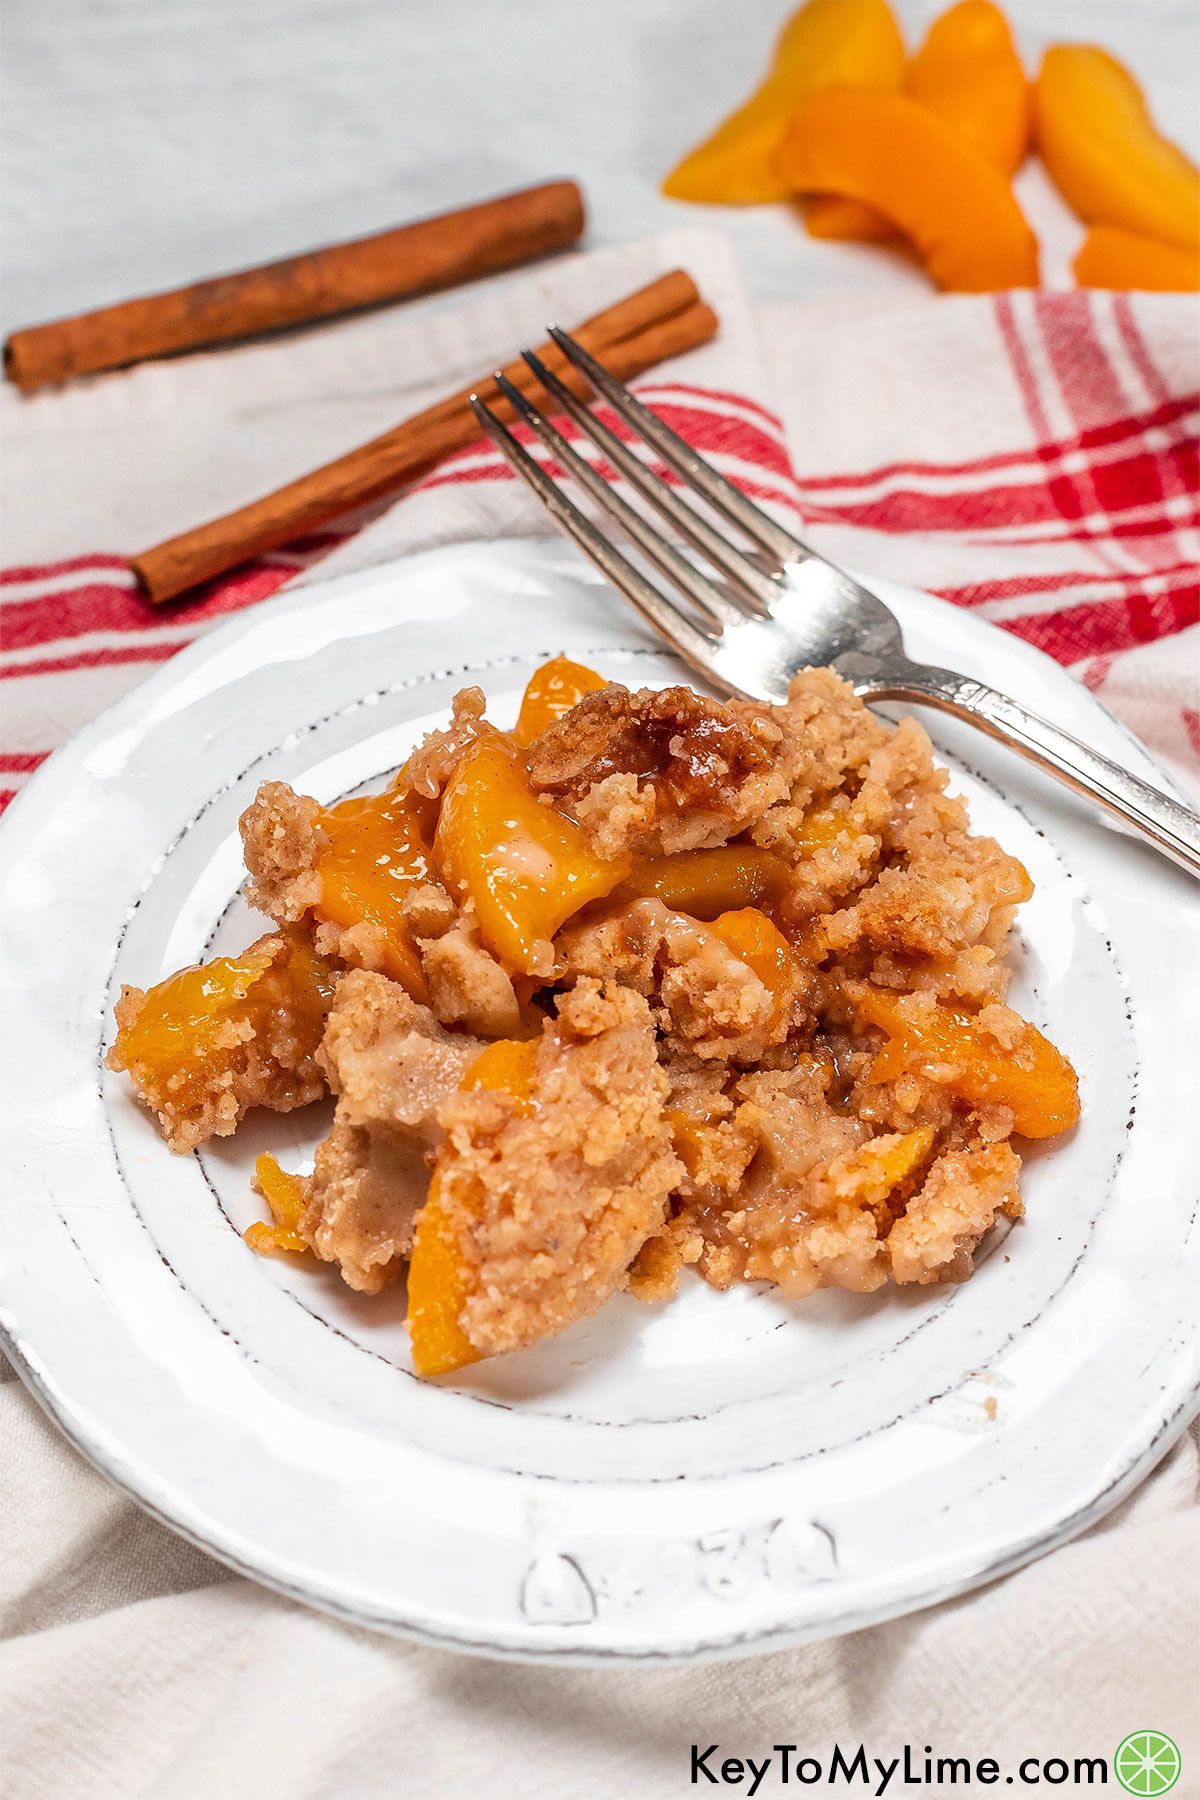 A scoop of peach crumble next to a fork on a white plate.